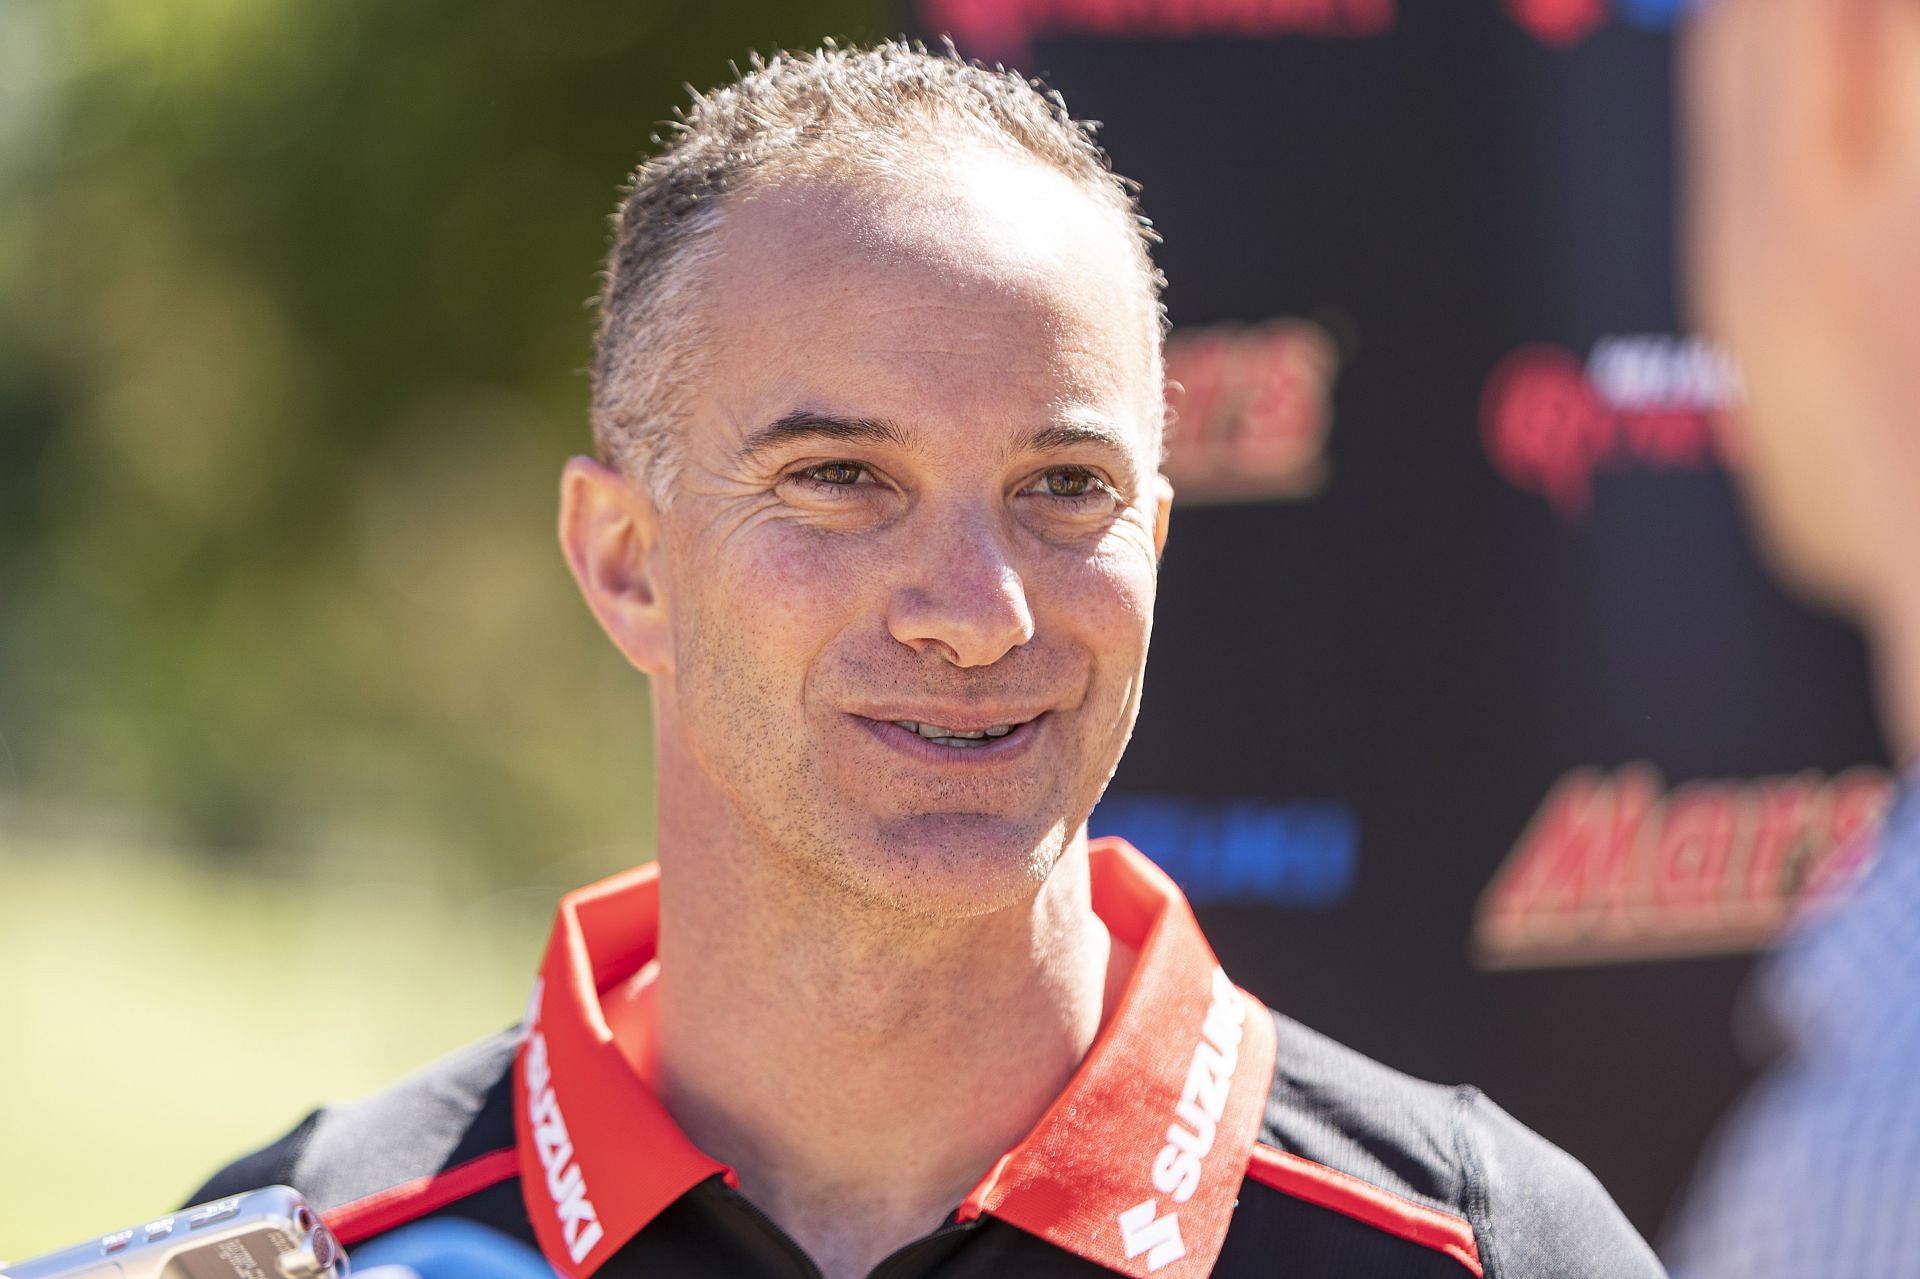 Michael Klinger is the current head coach of the Gujarat Giants.